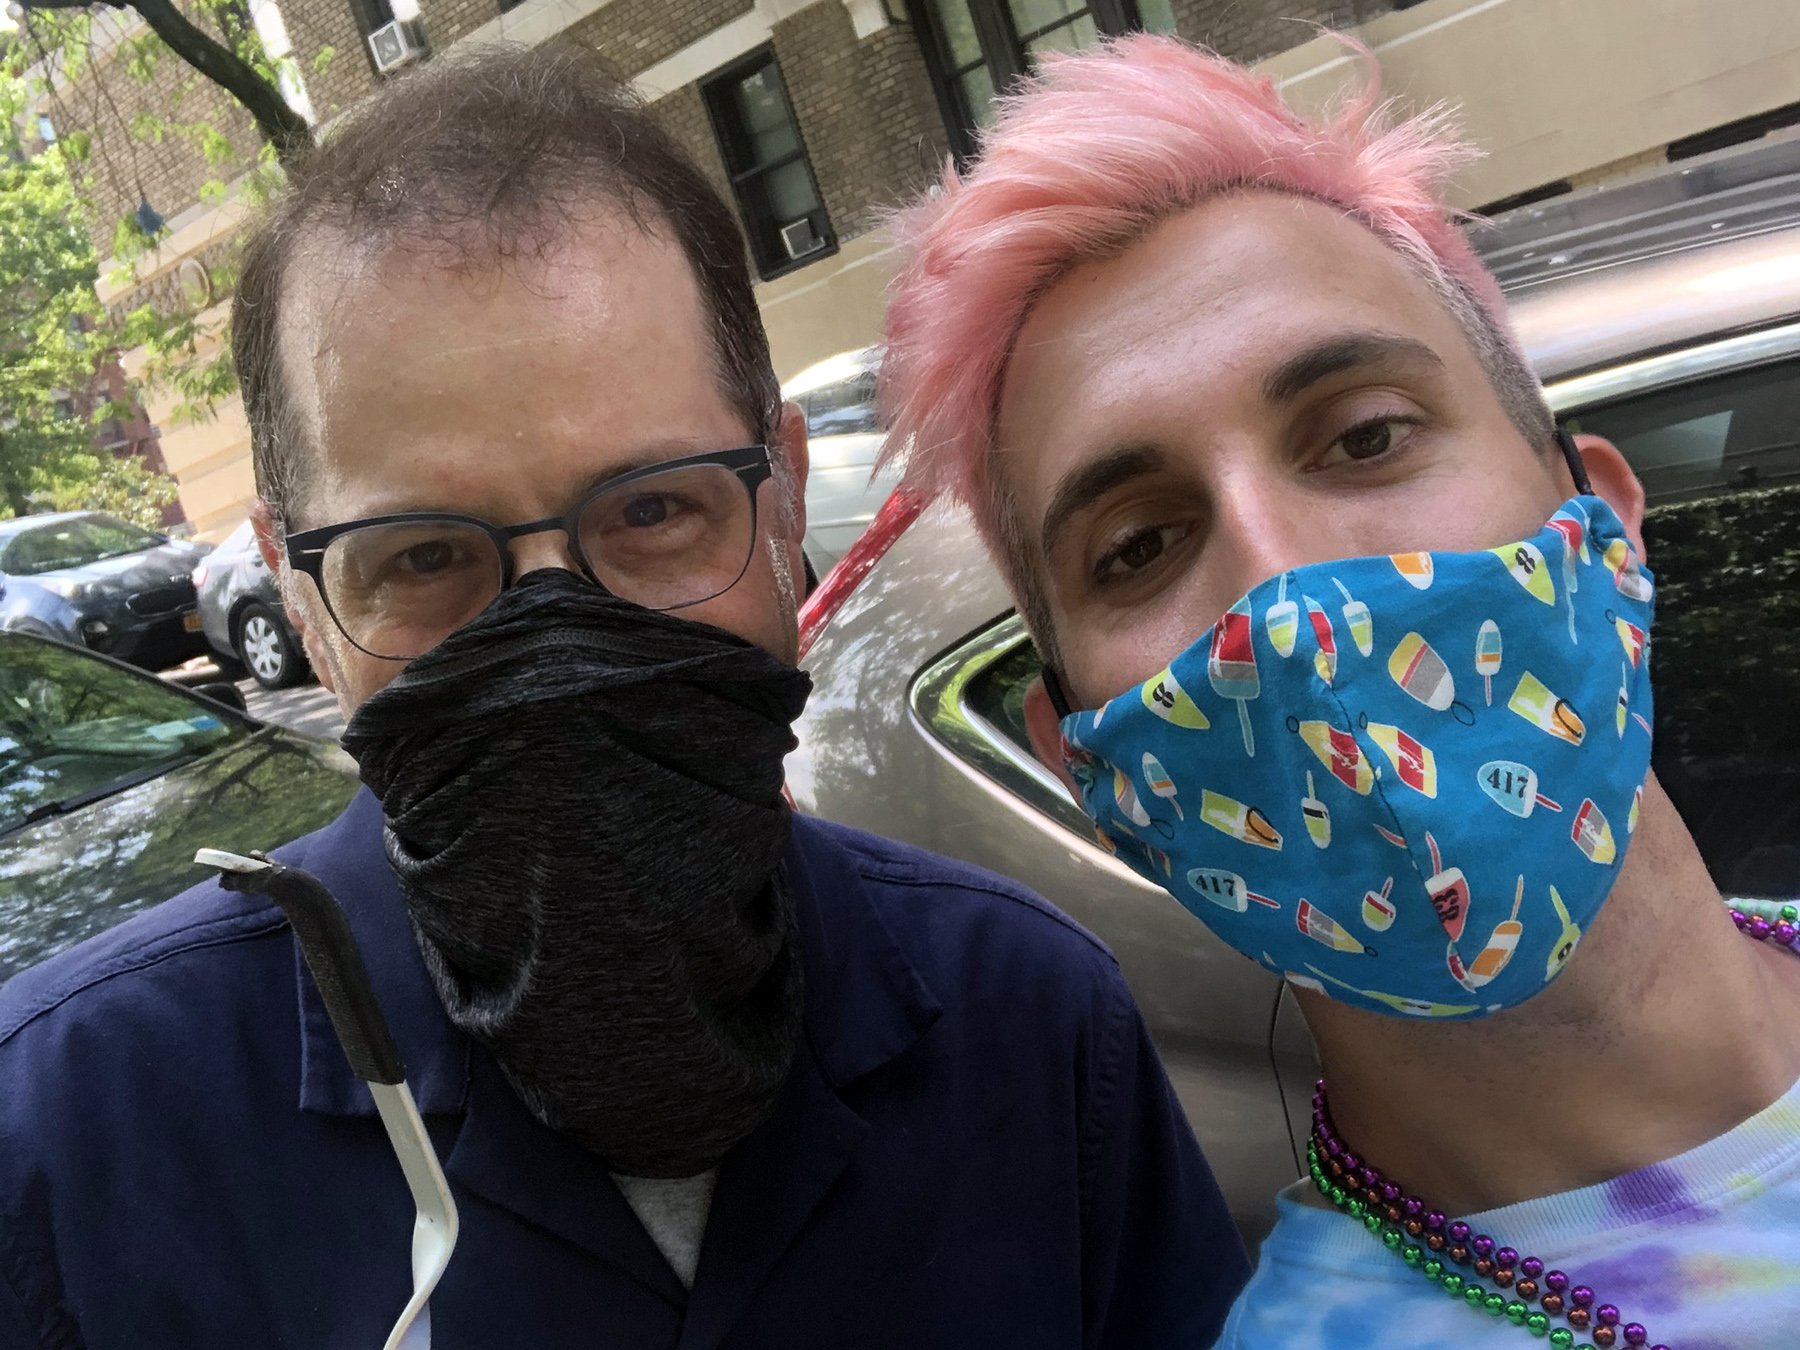 A selfie photo of Mark Levine and Cummings